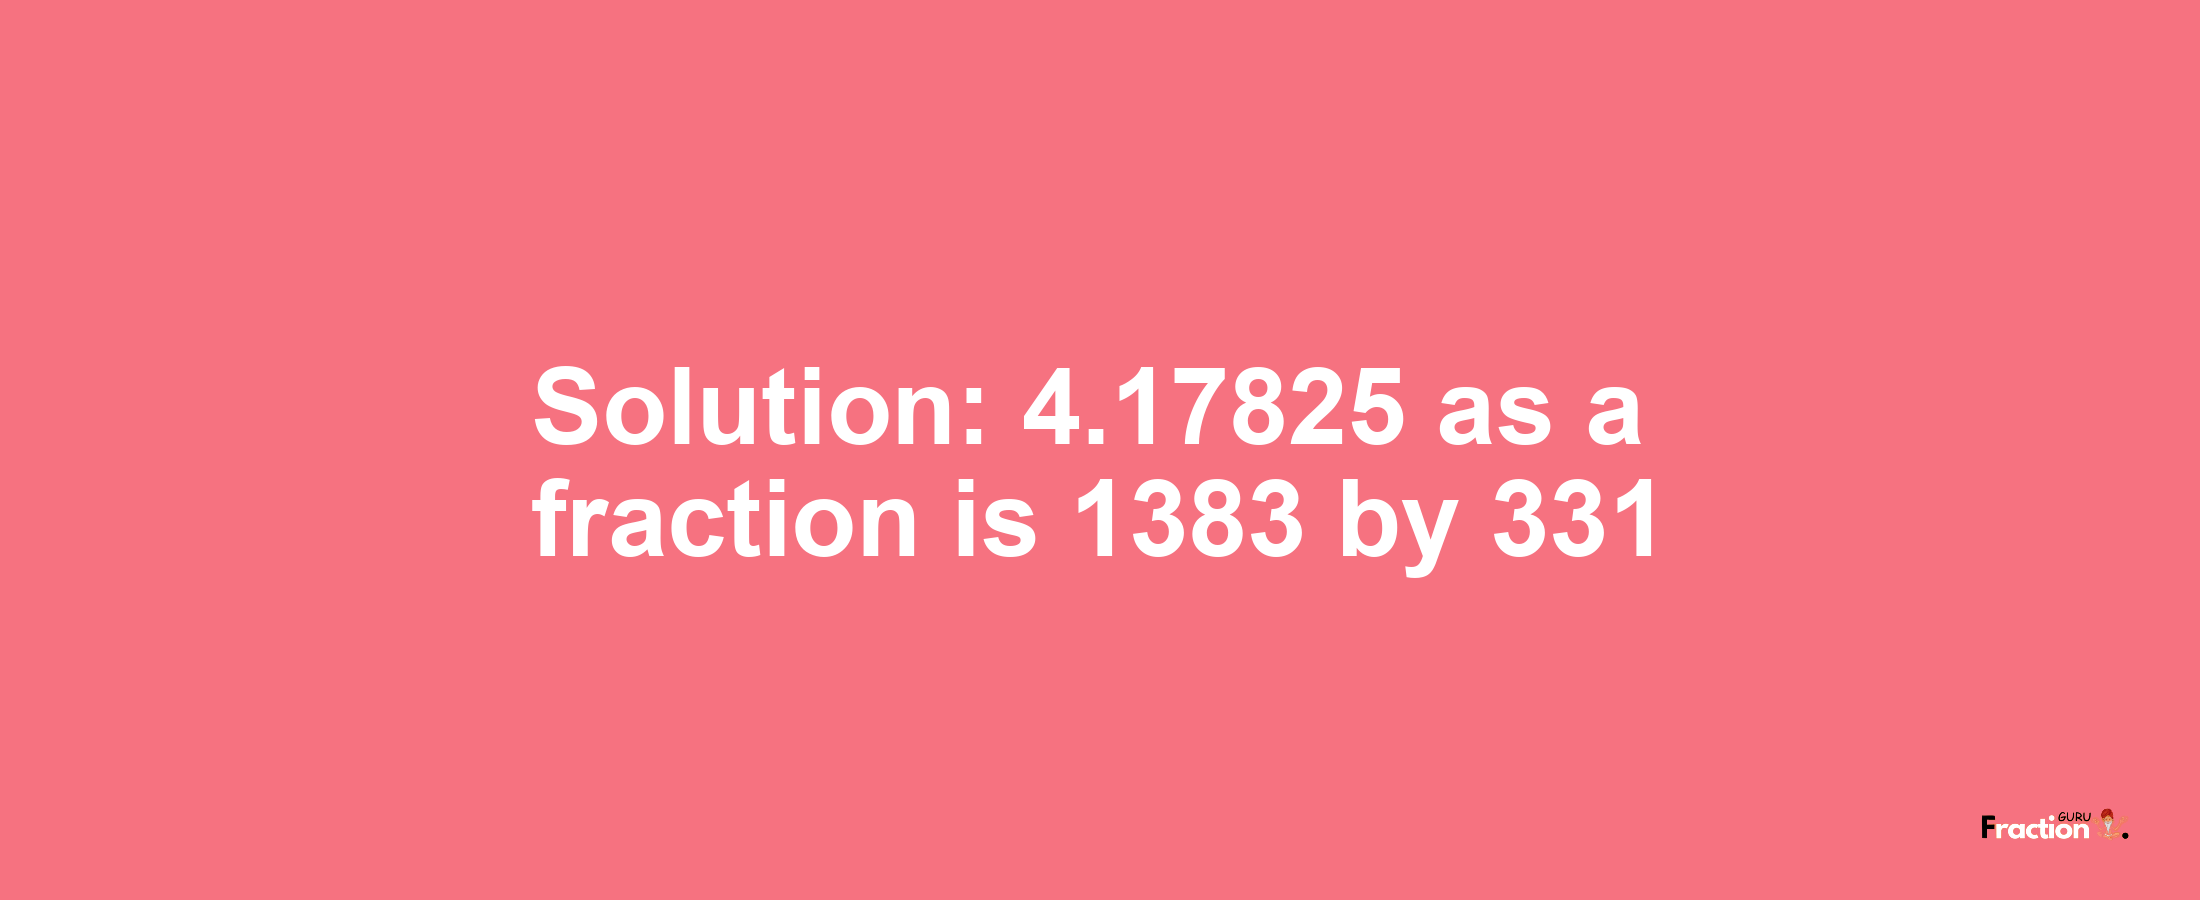 Solution:4.17825 as a fraction is 1383/331